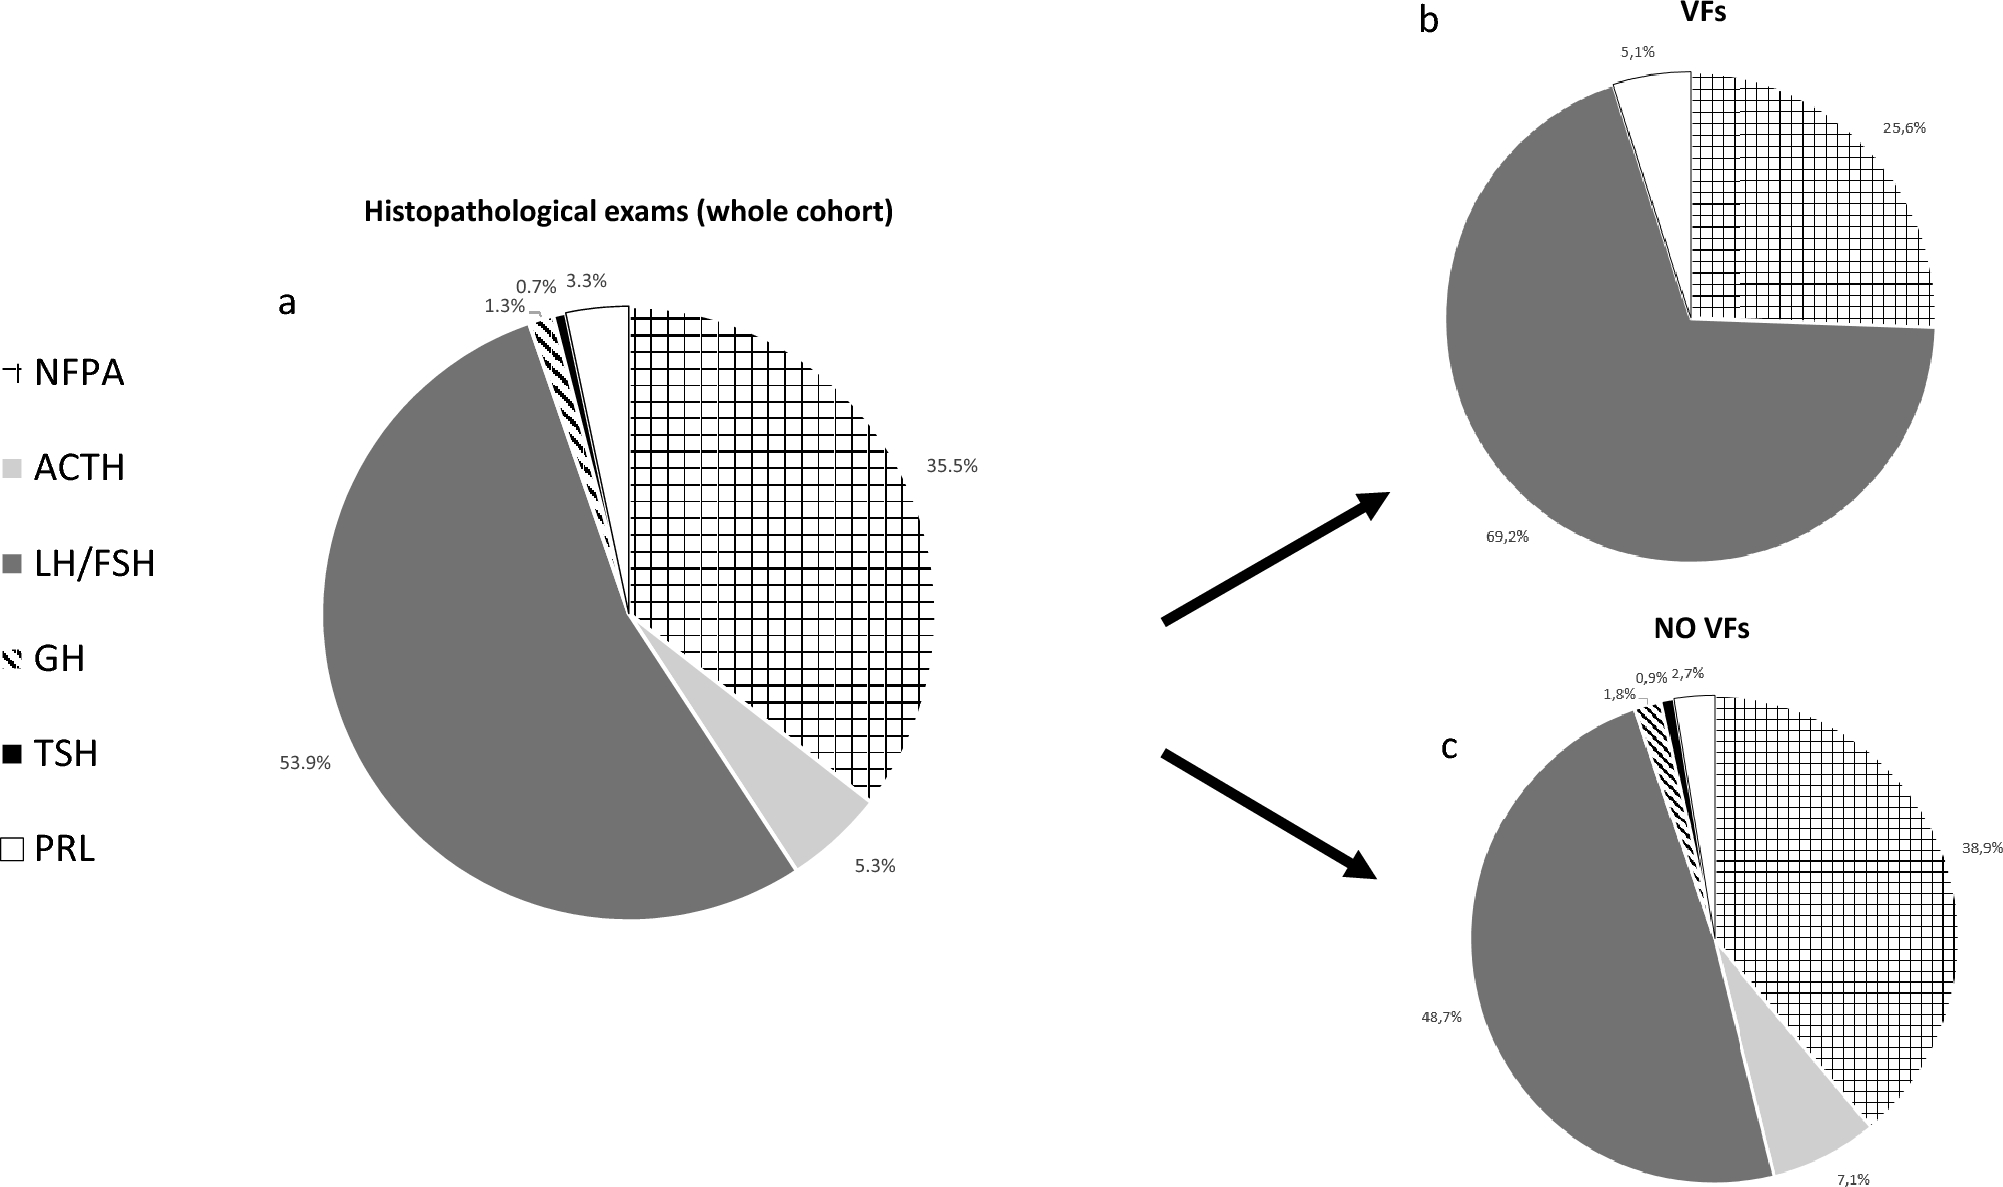 High prevalence of morphometric vertebral fractures opportunistically detected on thoracic radiograms in patients with non-functioning pituitary adenoma